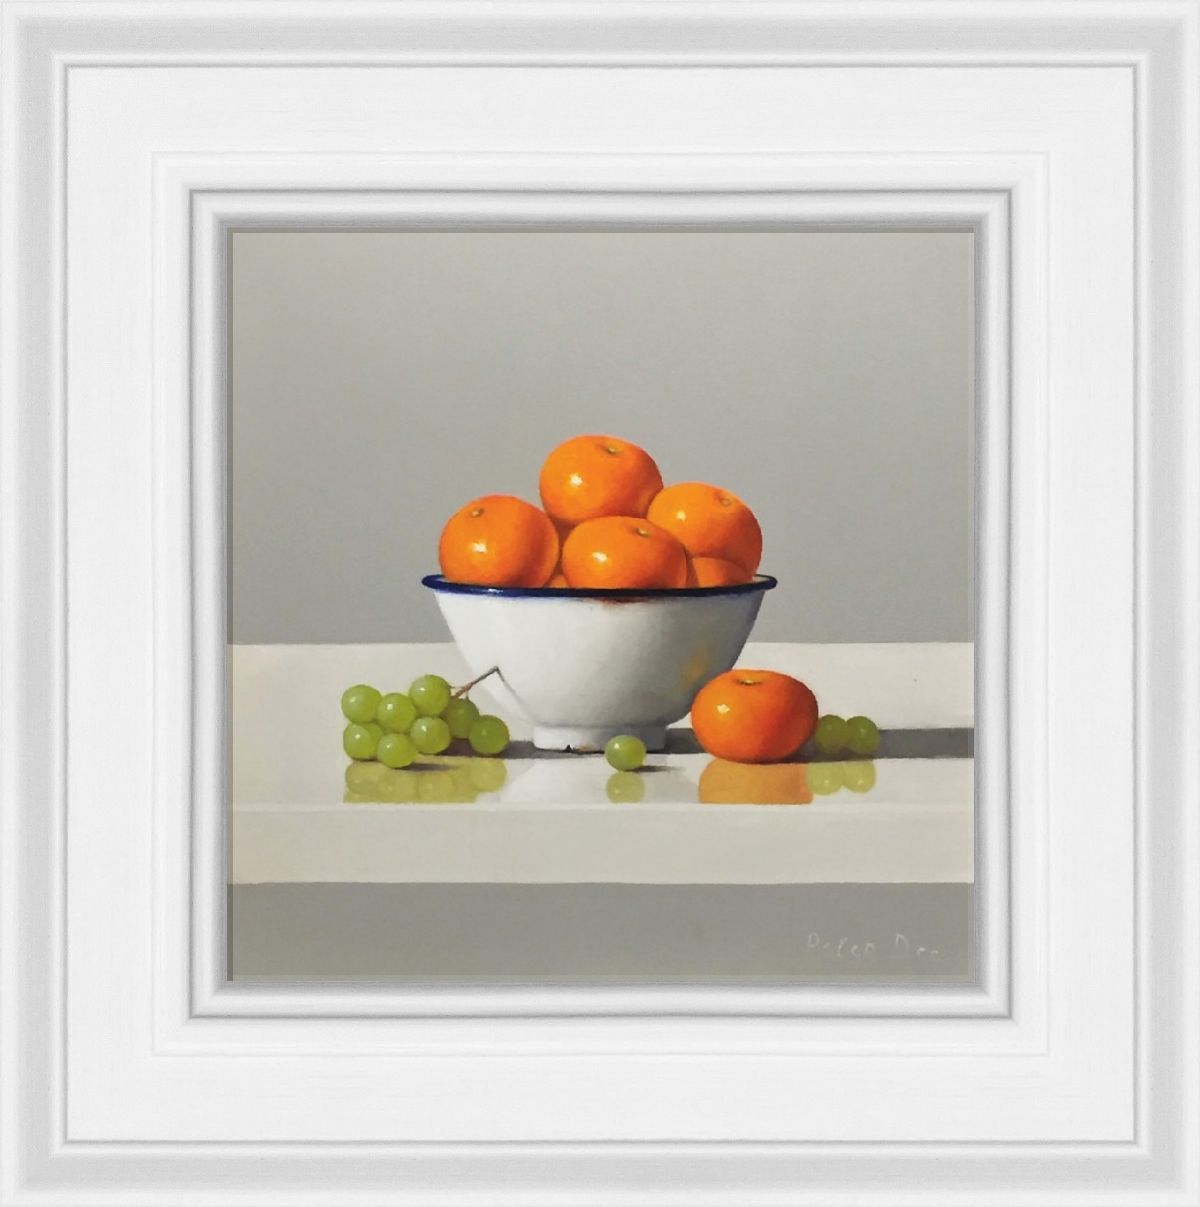 Bowl of Oranges with Grapes by Peter Dee